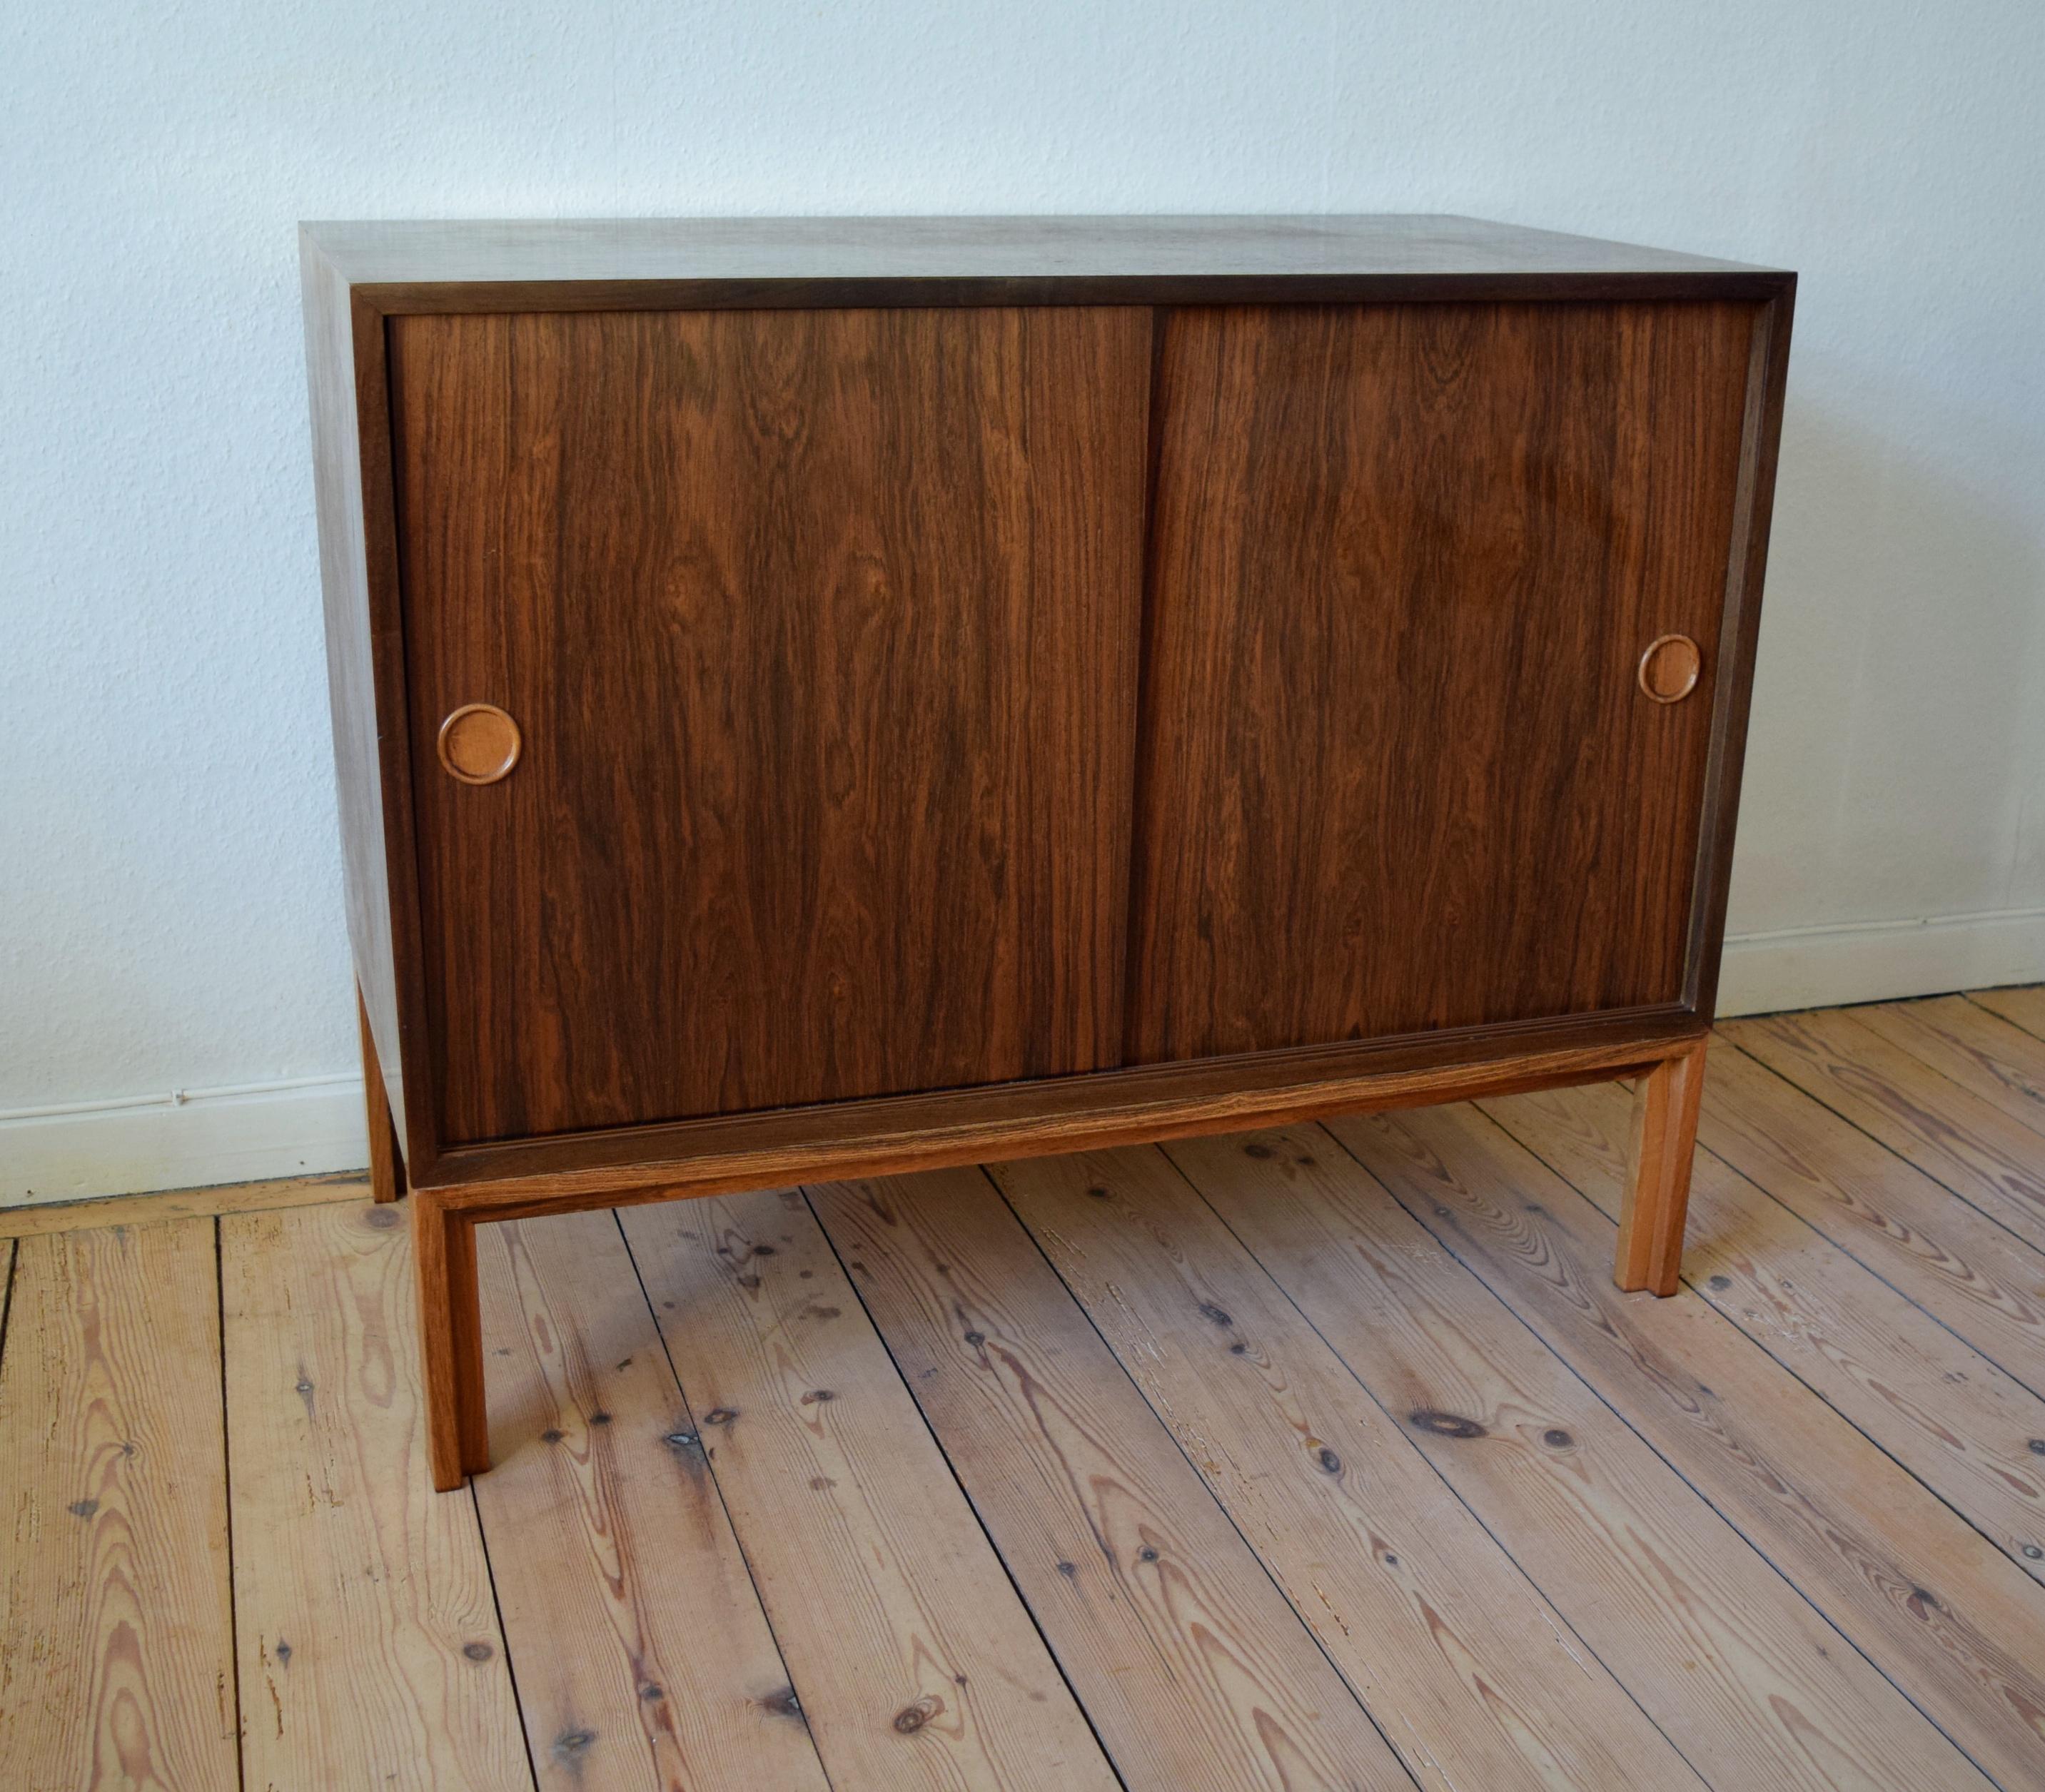 Danish rosewood bar cabinet by Kai Kristiansen for FM Møbler. Manufactured in the 1960s, this piece features two sliding doors with adjustable internal shelf and three felt-lined rosewood drawers. Sits on frame base solid rosewood legs. Striking